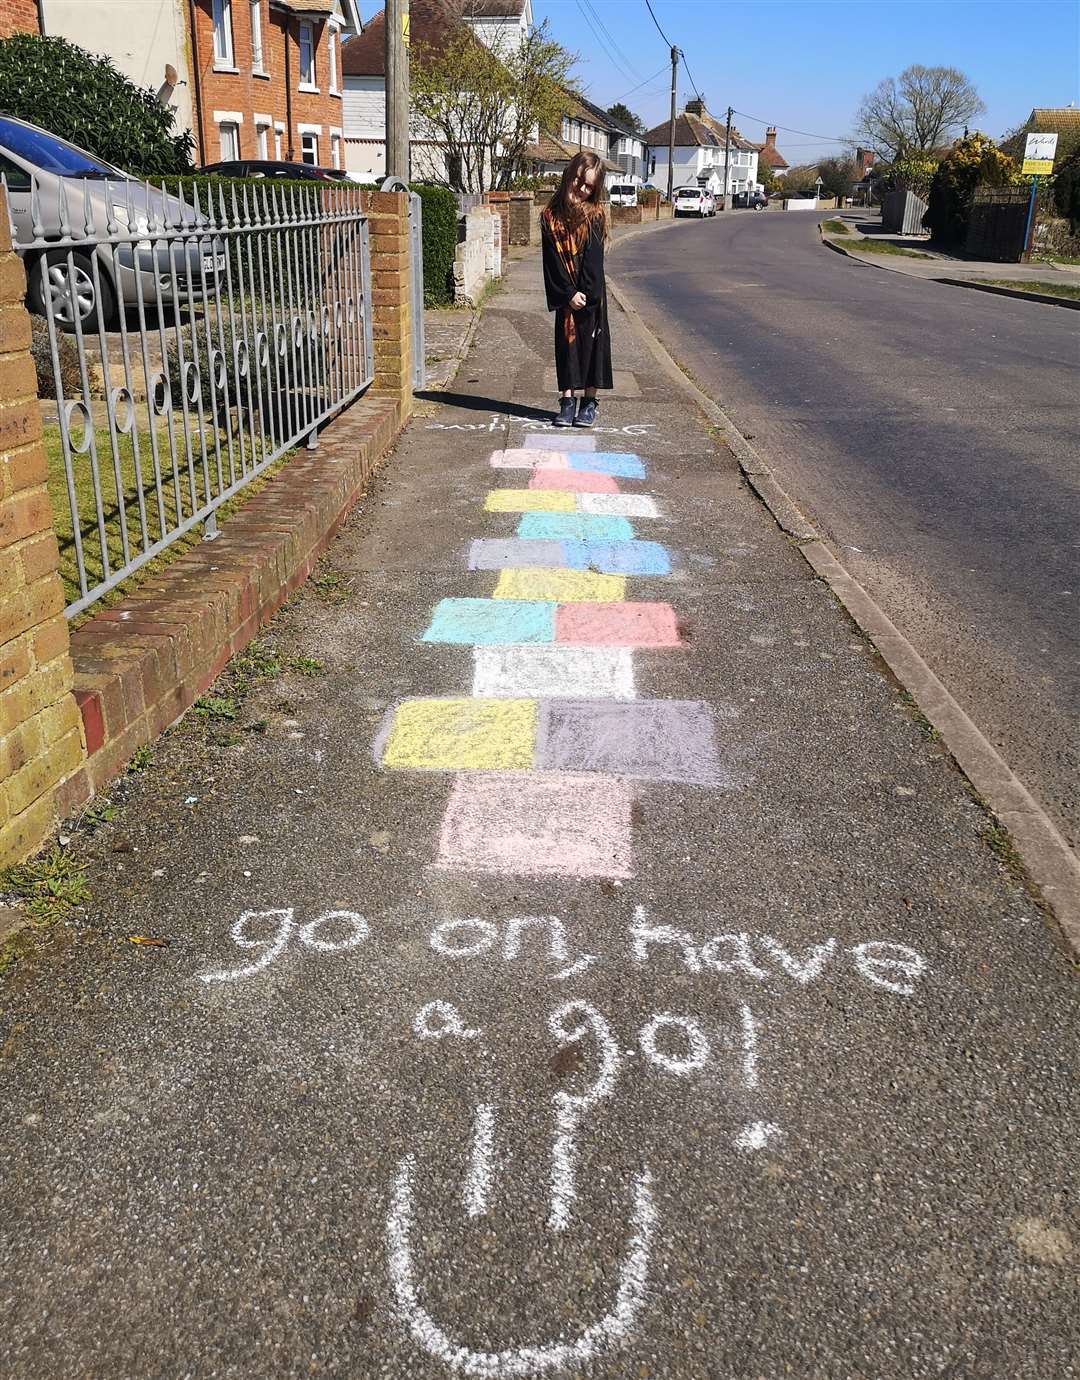 Heather Elder sent in this picture of her daughter Sofia Friday, aged seven from Dymchurch, a Lympne Primary school pupil. She made a big hopscotch along the path for people to do while having their daily exercise